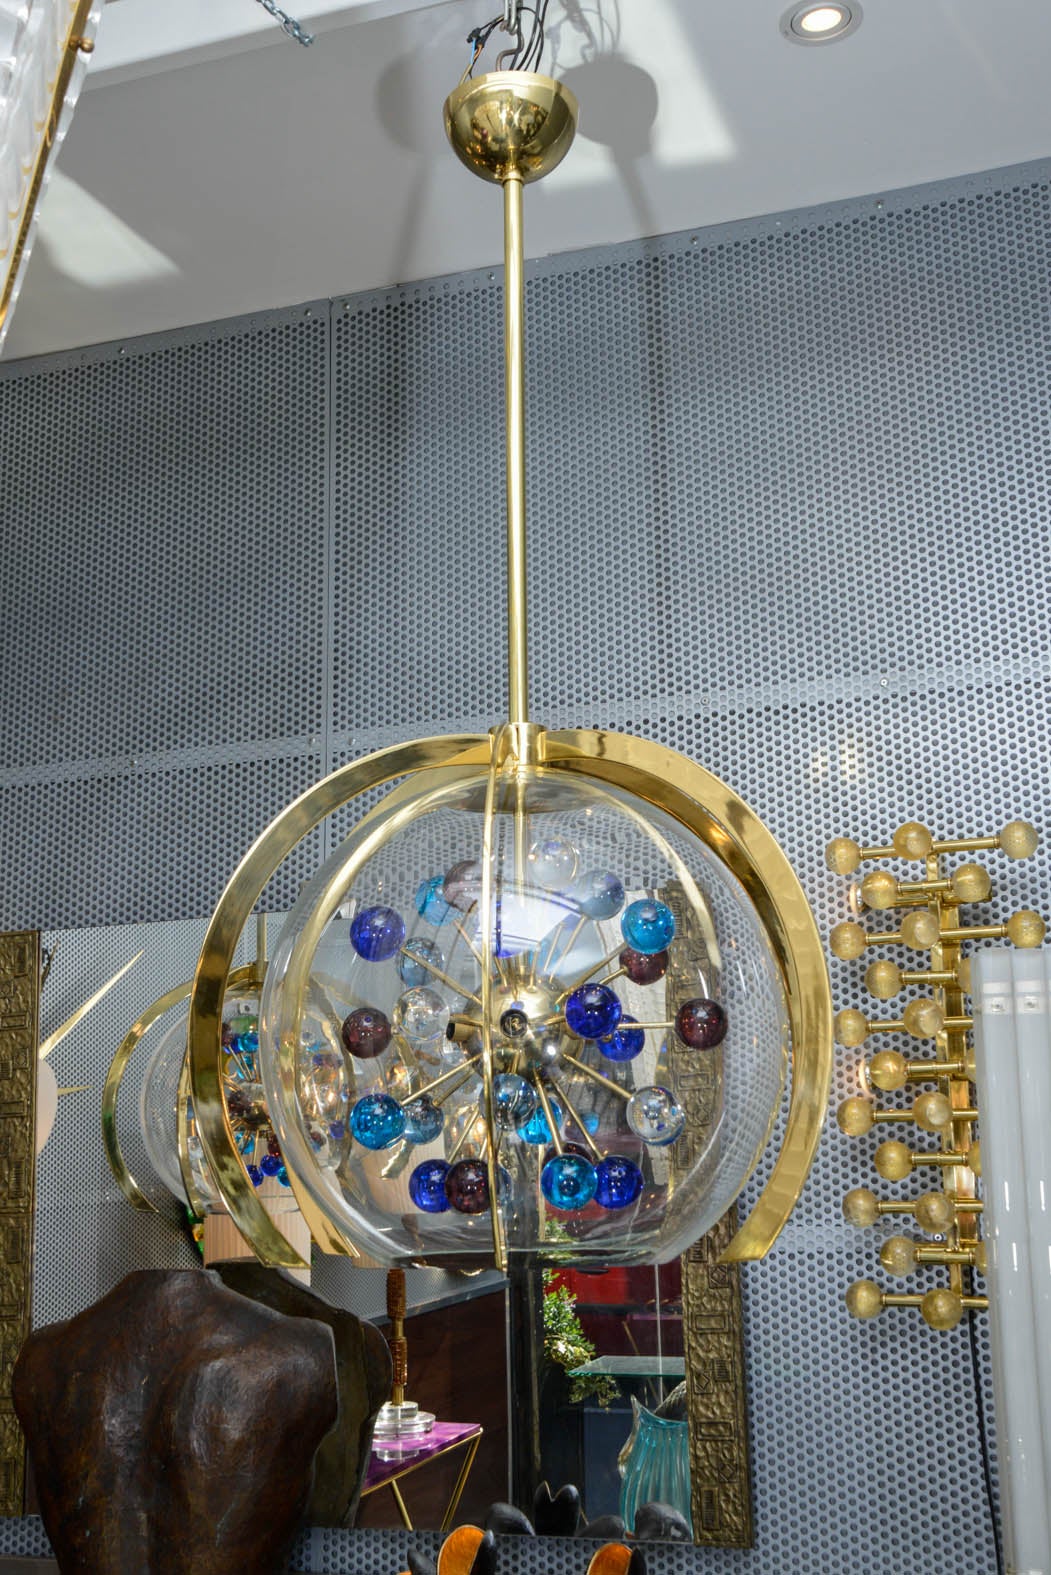 Chandelier with Murano glass balls in brass structure.
Could be made on order with other finish or size